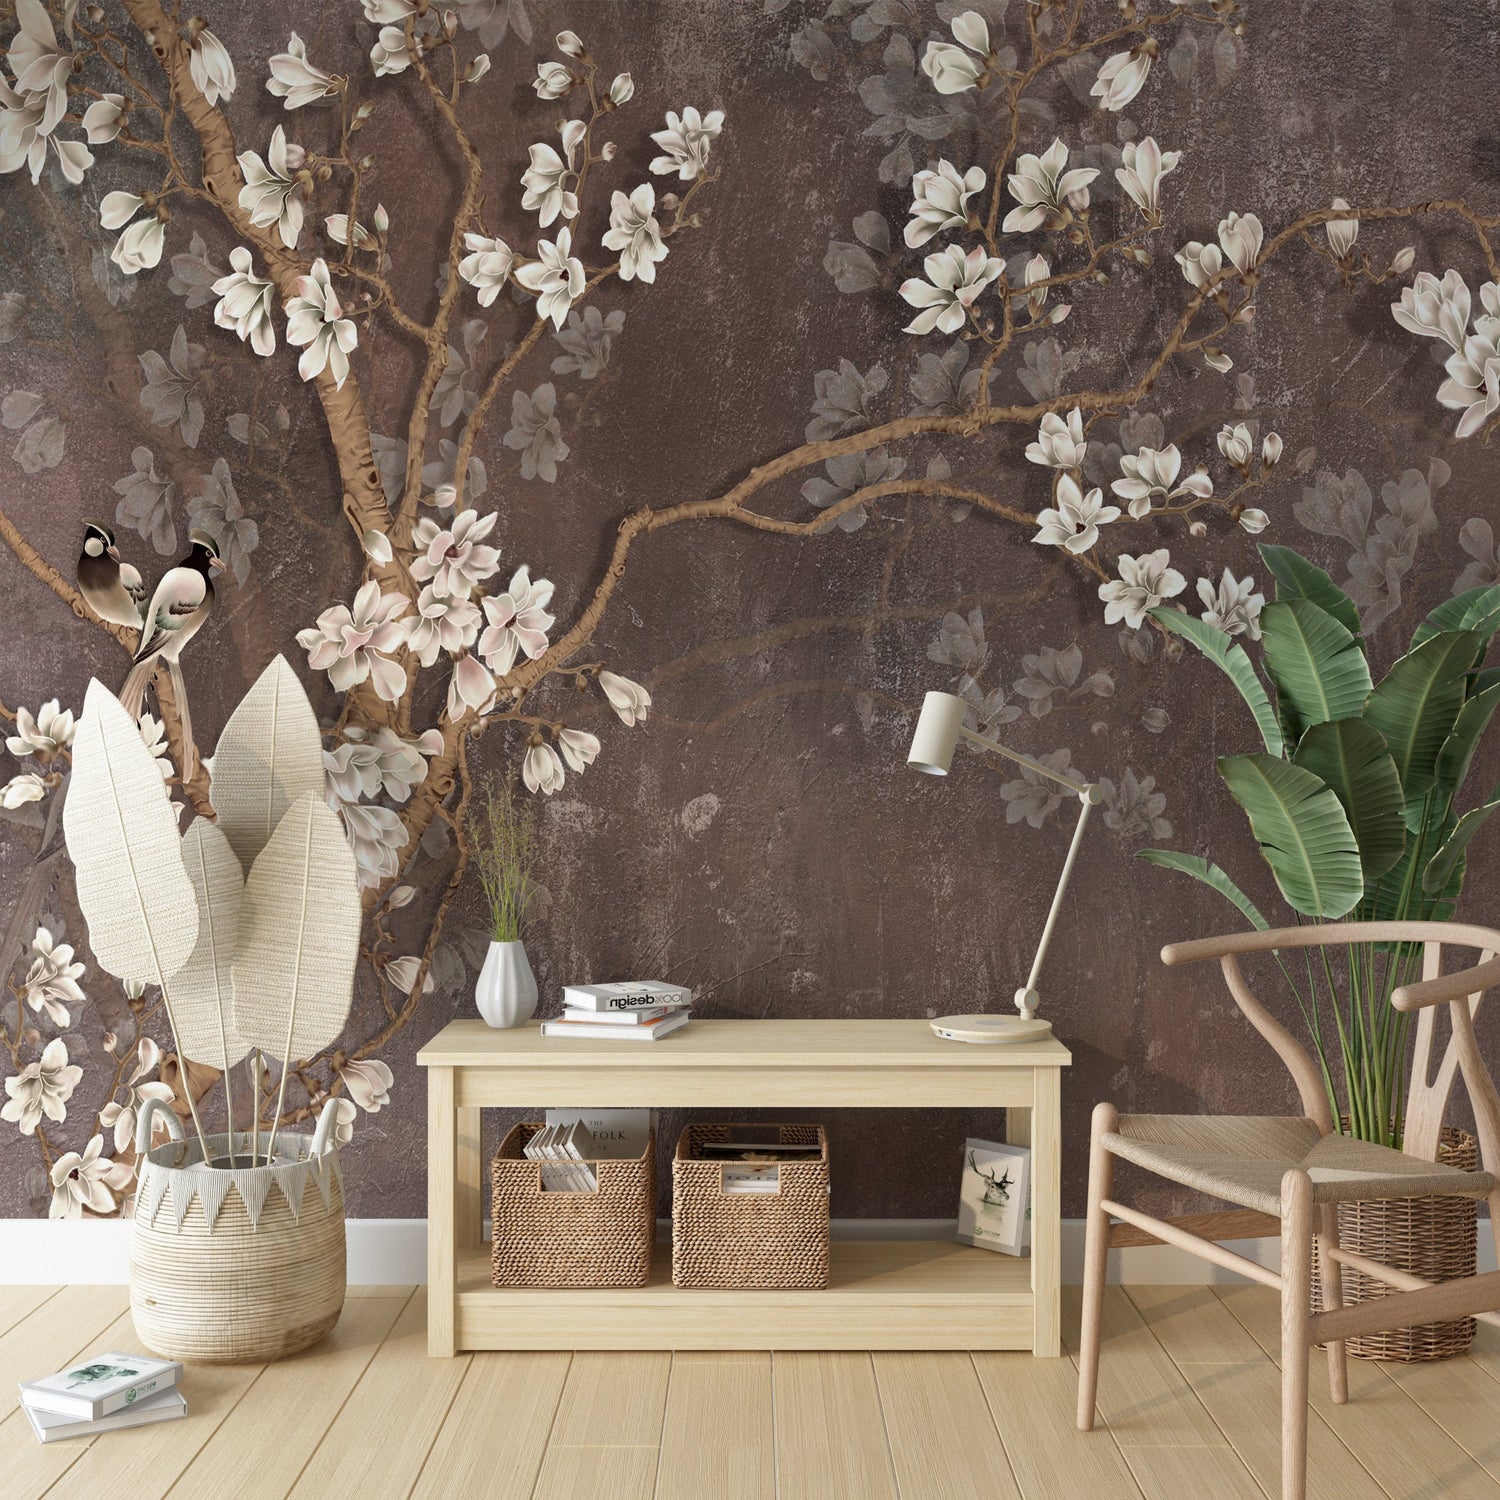 Chinoiserie Wallpaper, Birds and Flowers, Japanese Wallpaper, Asian Wallpaper, Tree Wall Mural, Removable Wallpaper,